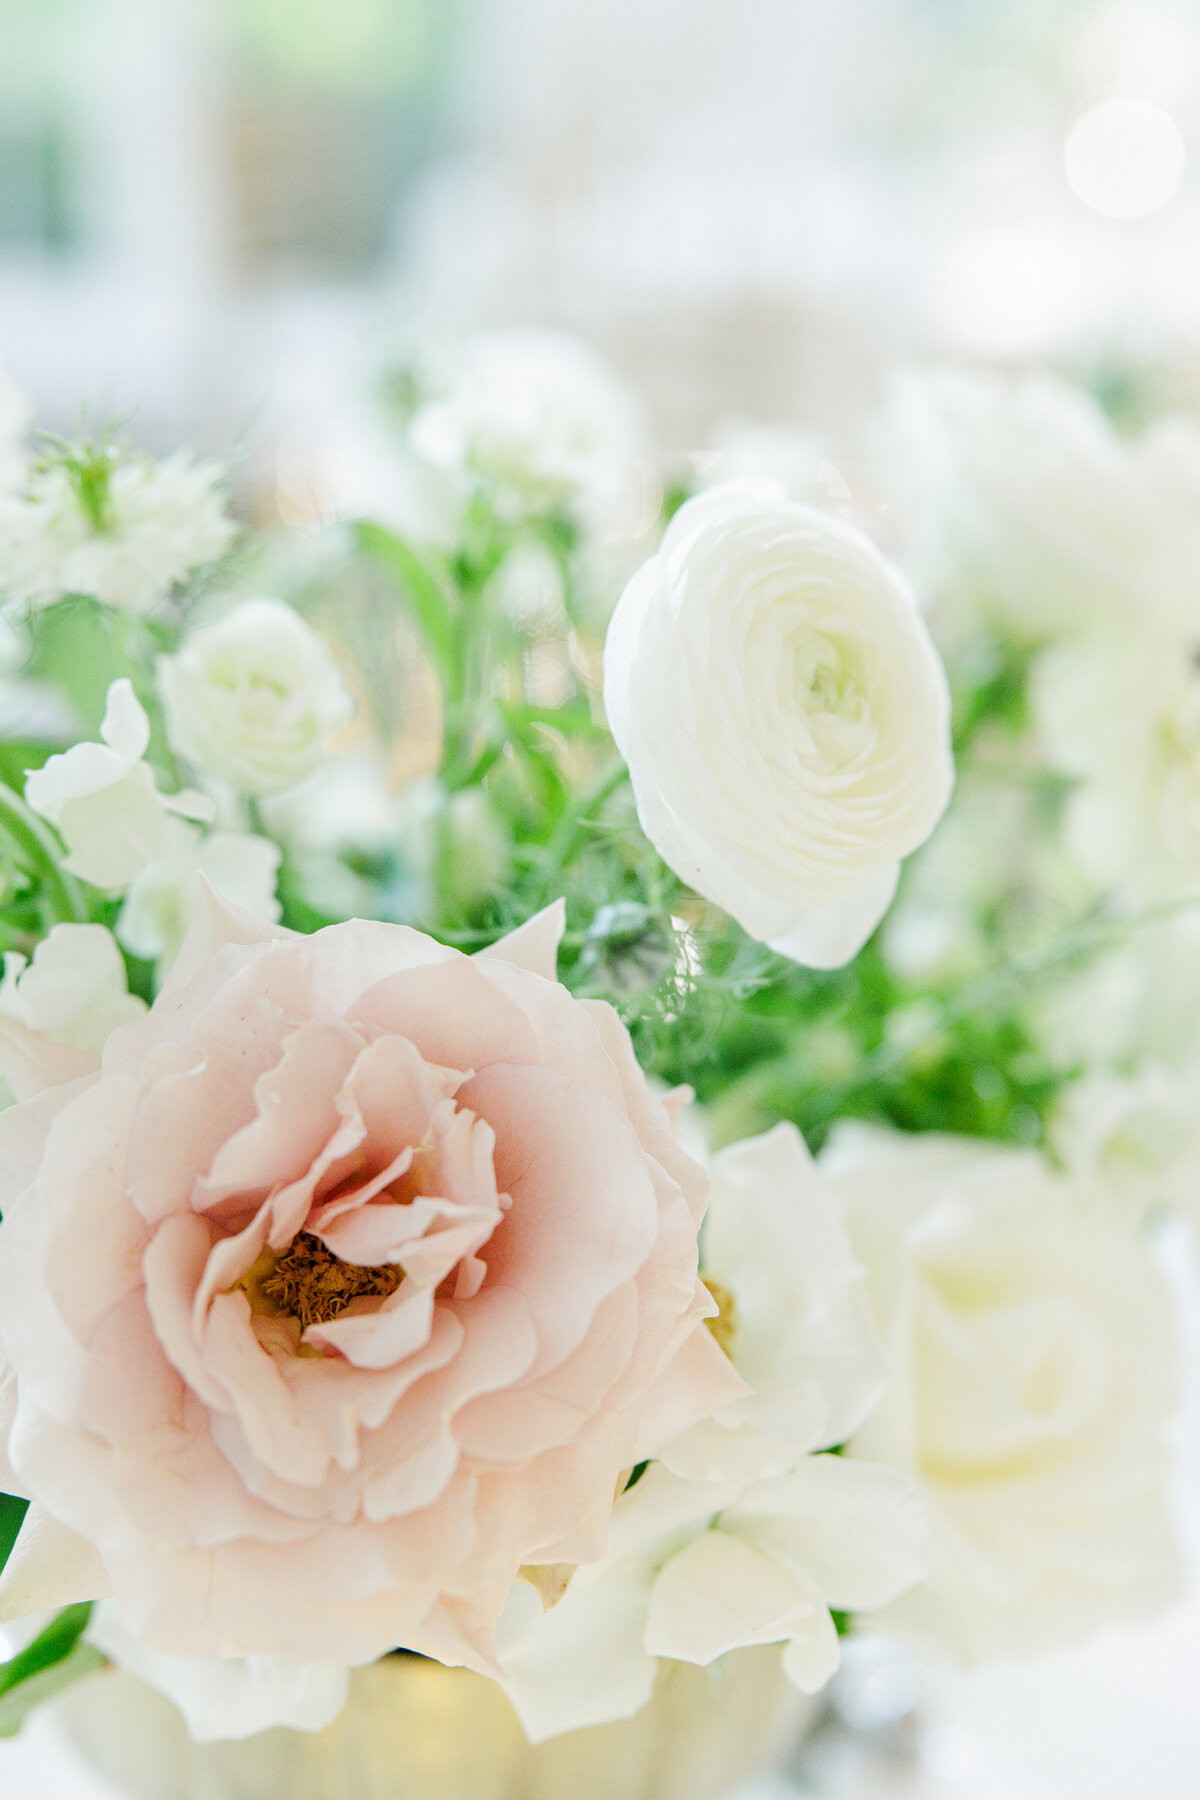 Wedding floral table centerpieces with blush and white flowers